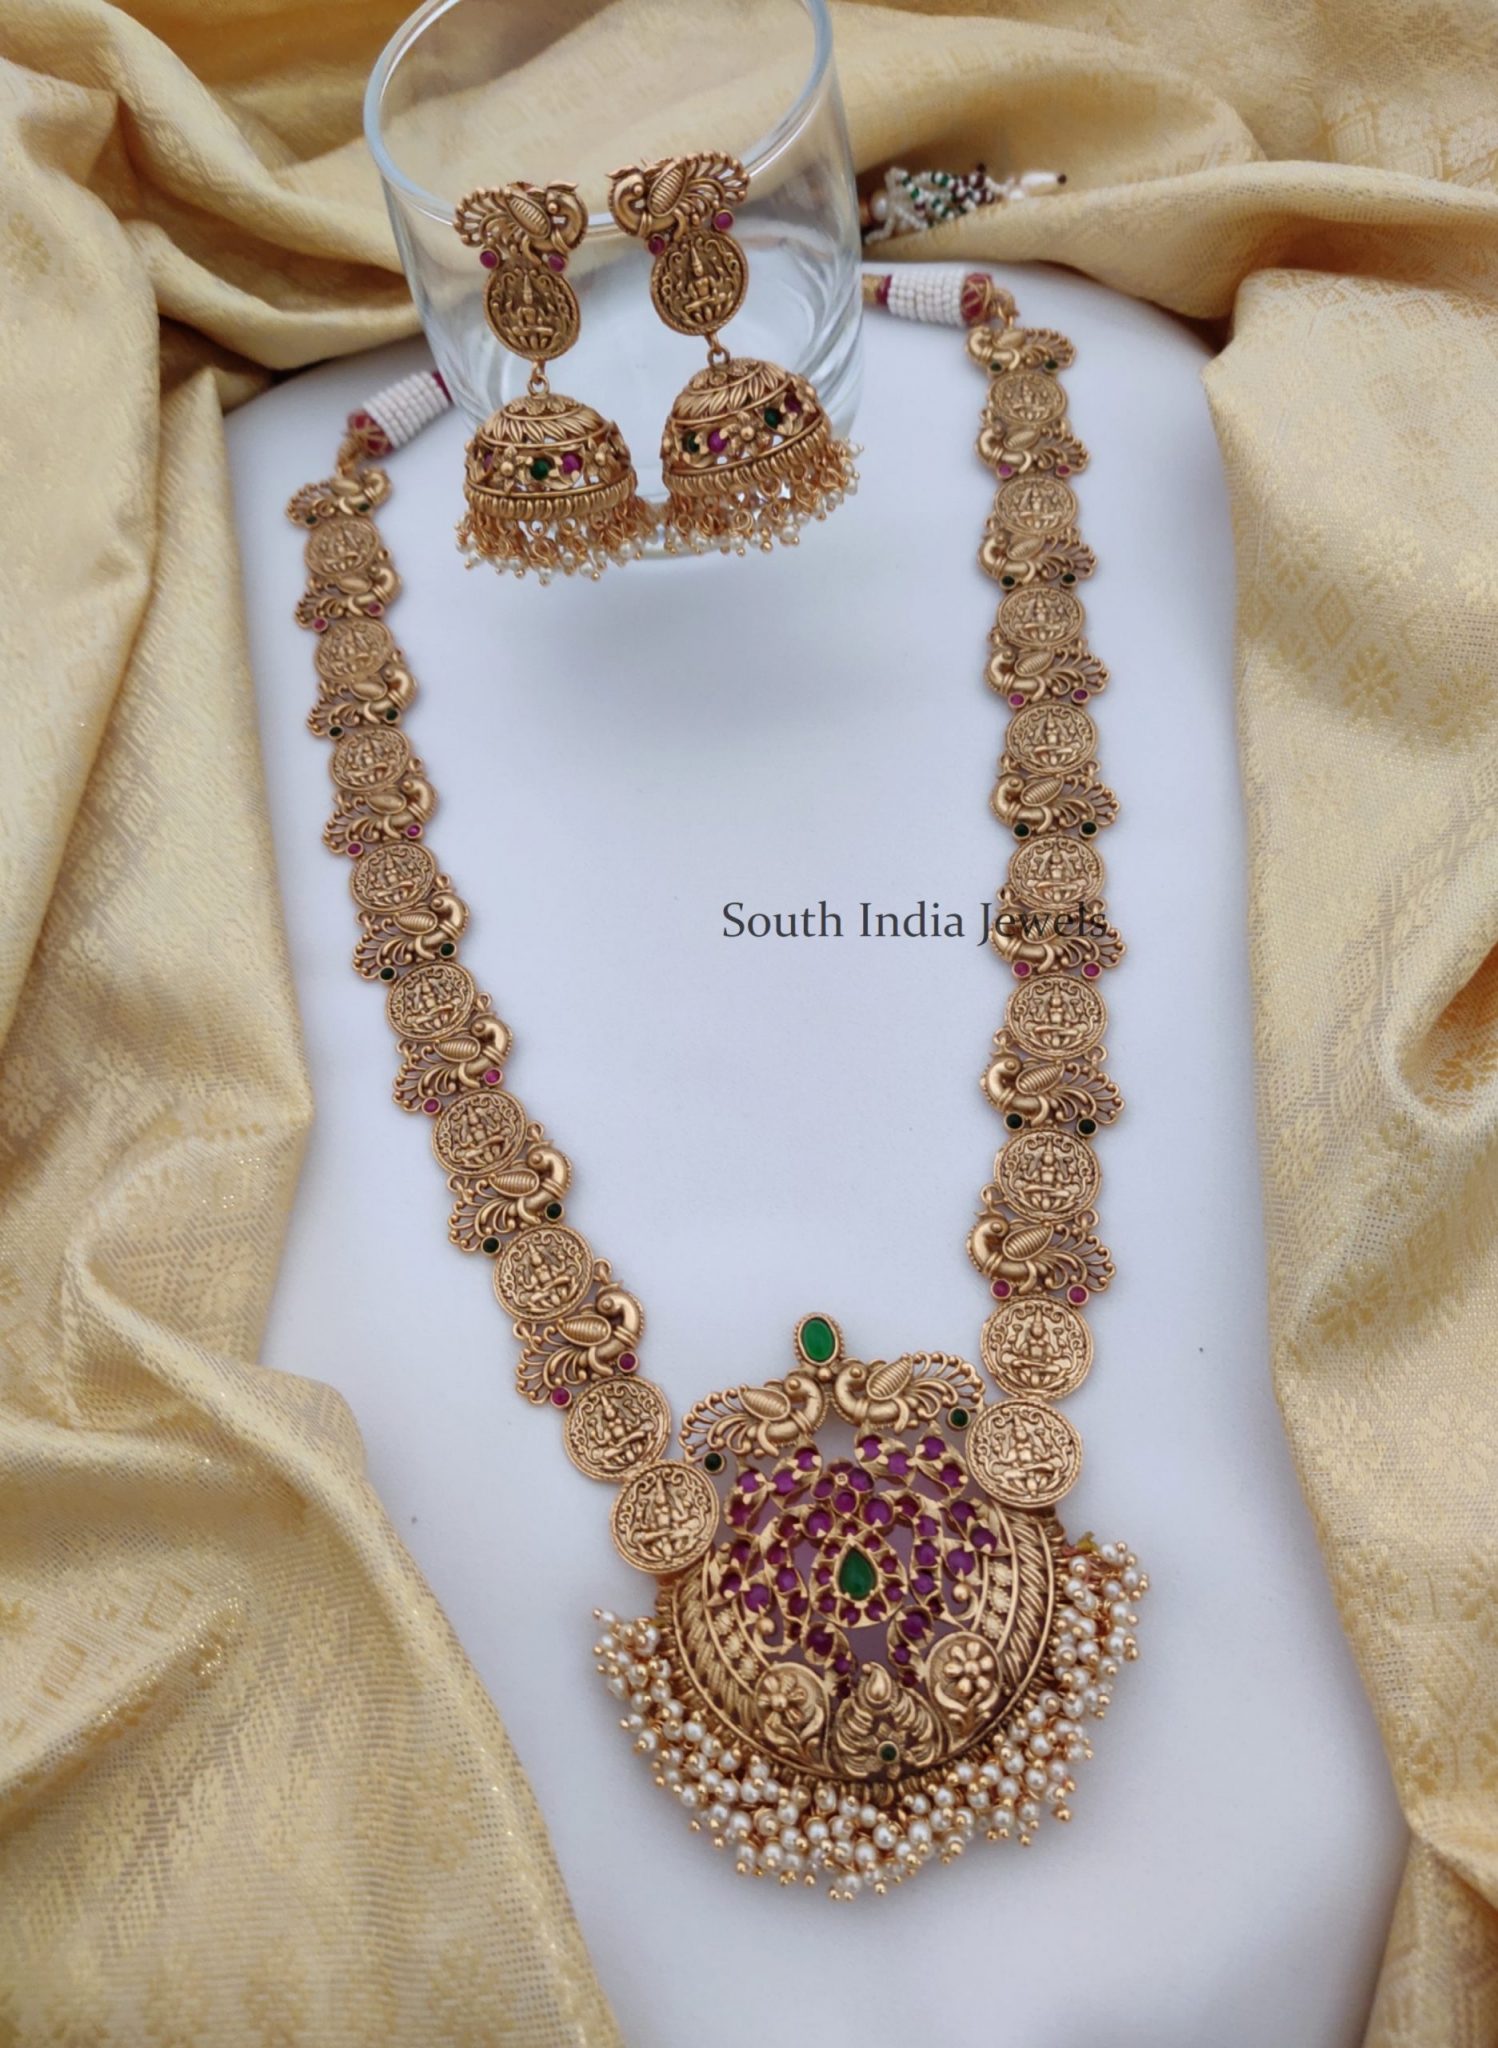 Shop Traditional Necklaces Designs All Under One Roof!